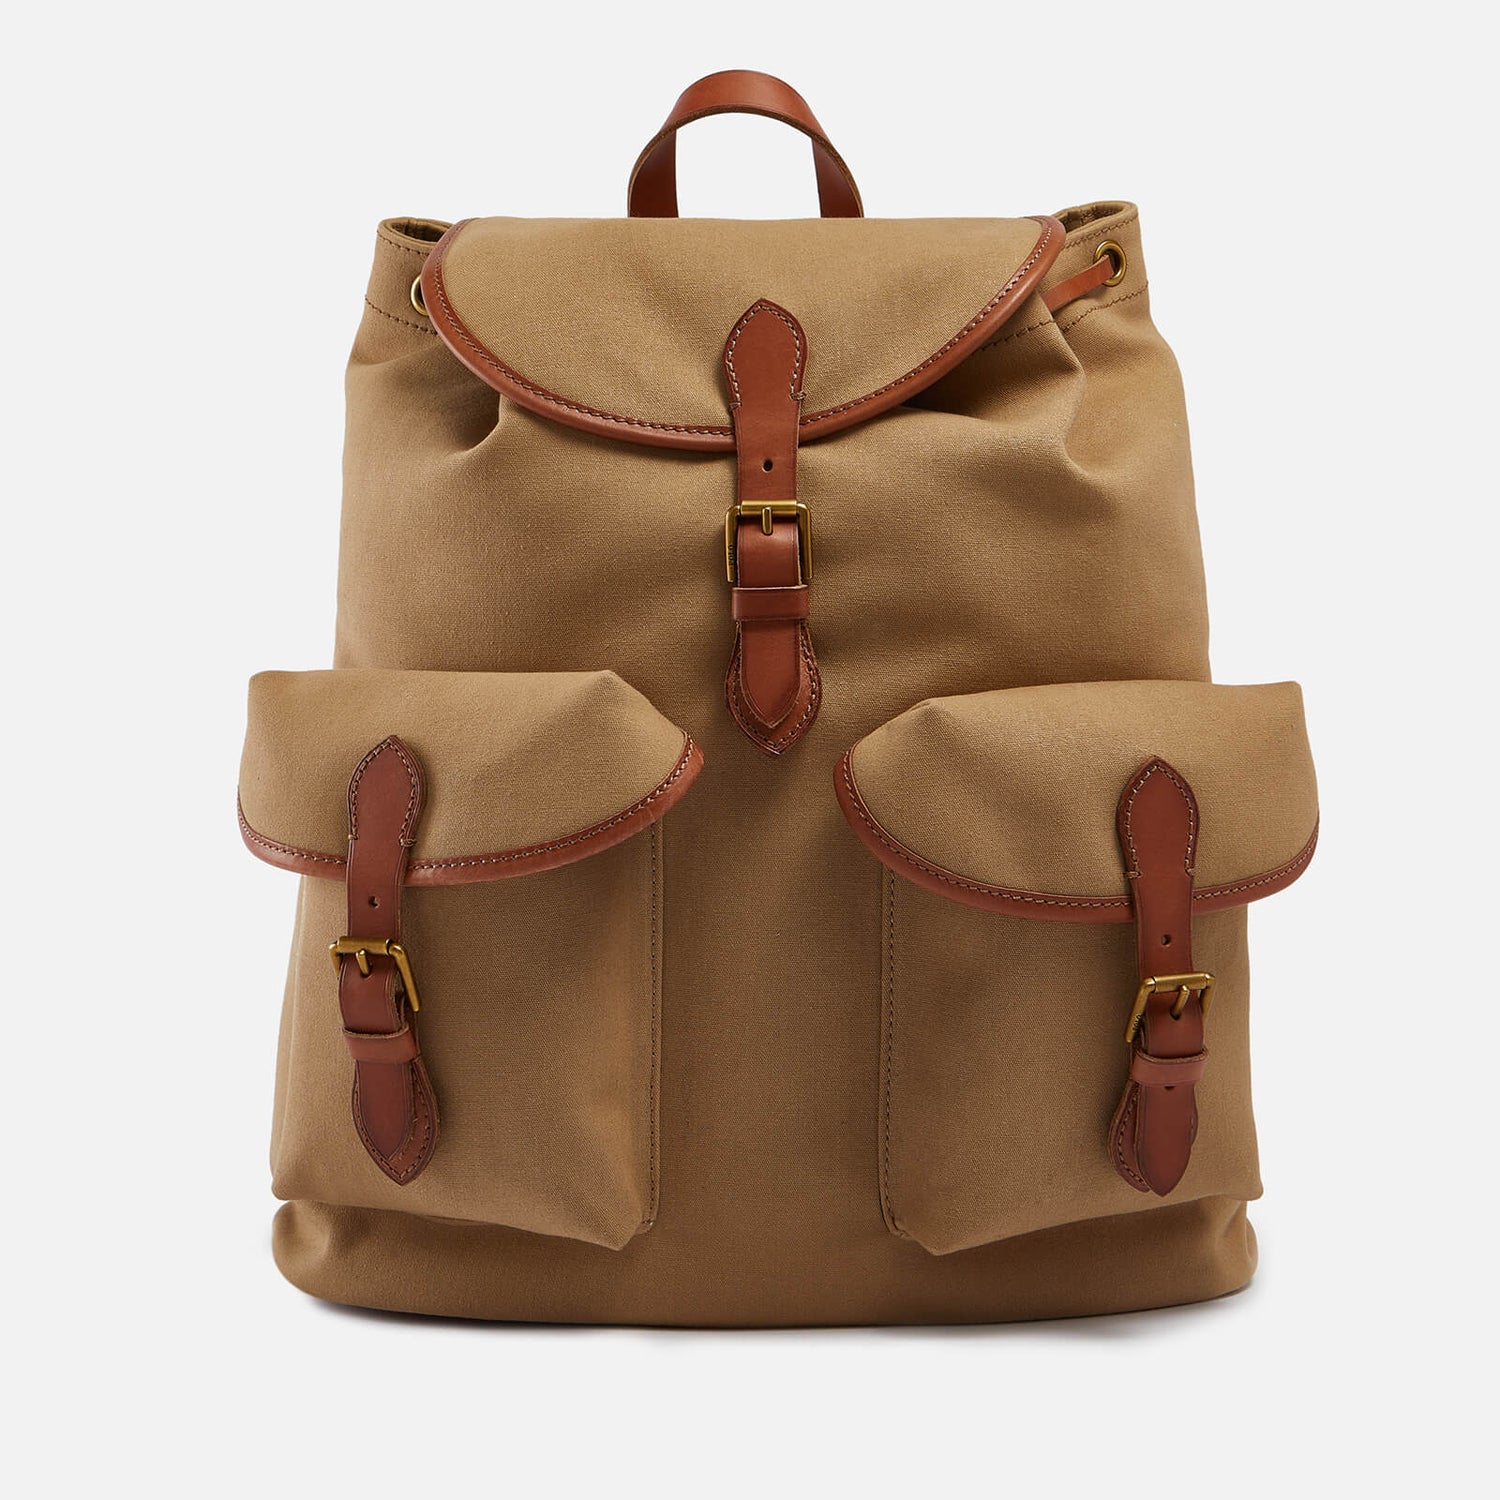 Polo Ralph Lauren Leather-Trimmed Canvas Backpack